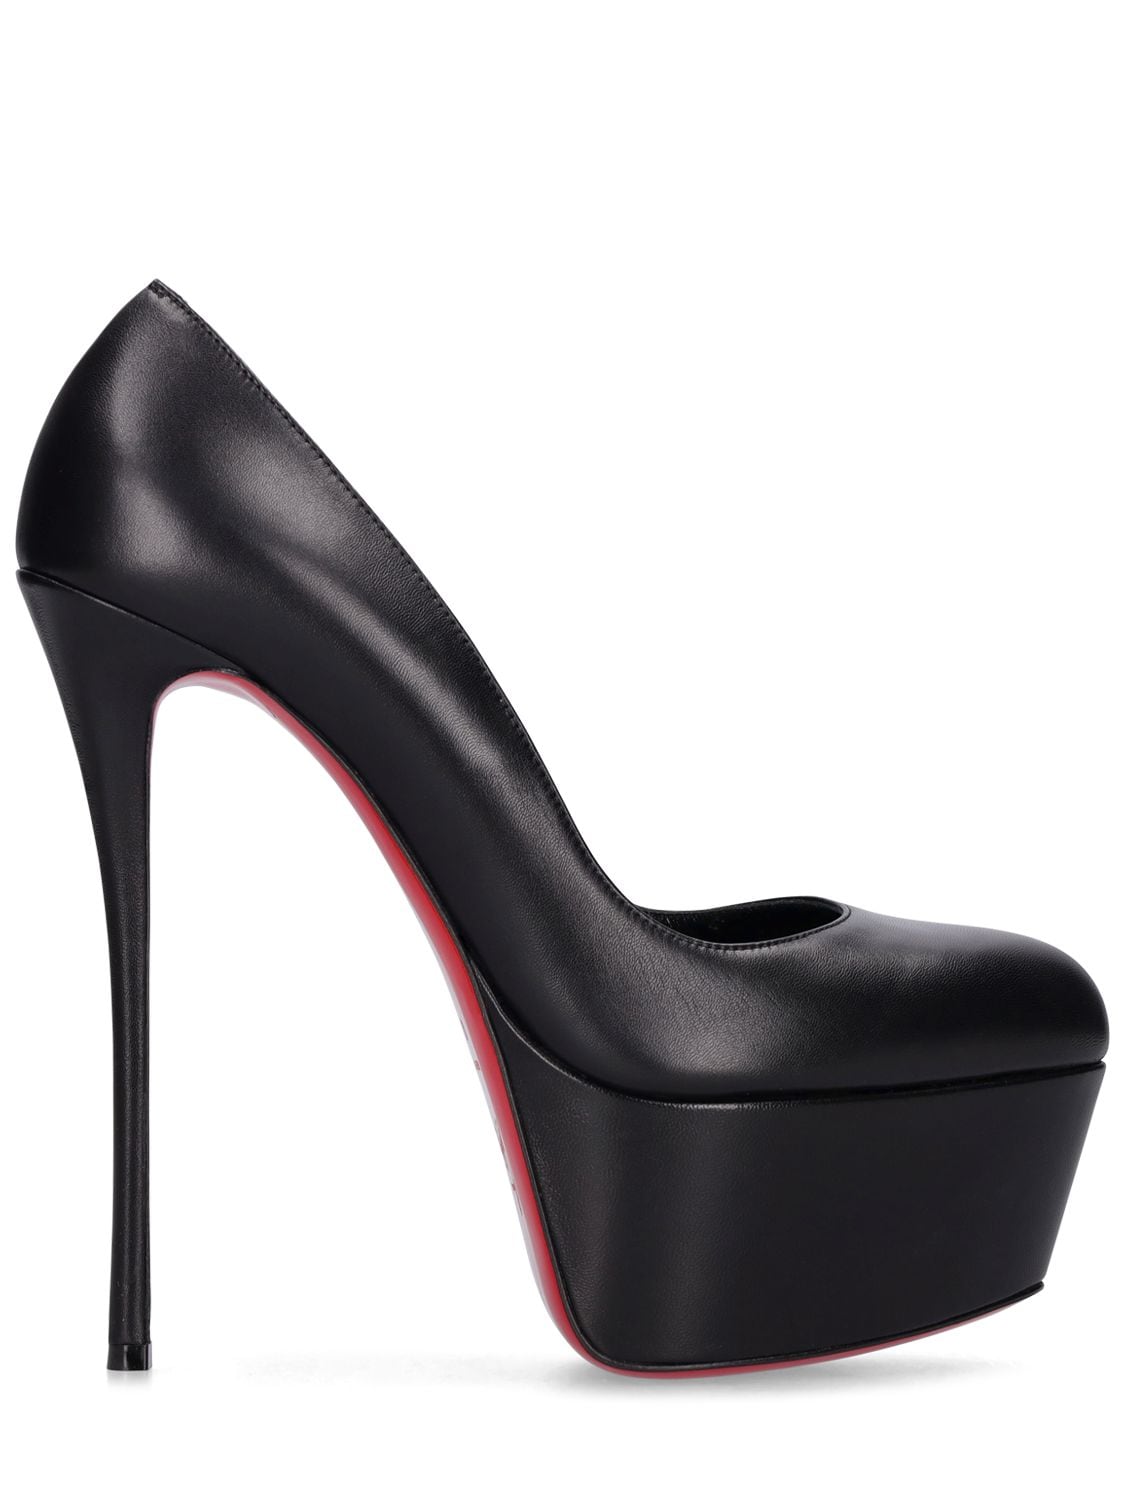 CHRISTIAN LOUBOUTIN 160MM DOLLY LEATHER PLATFORM PUMPS